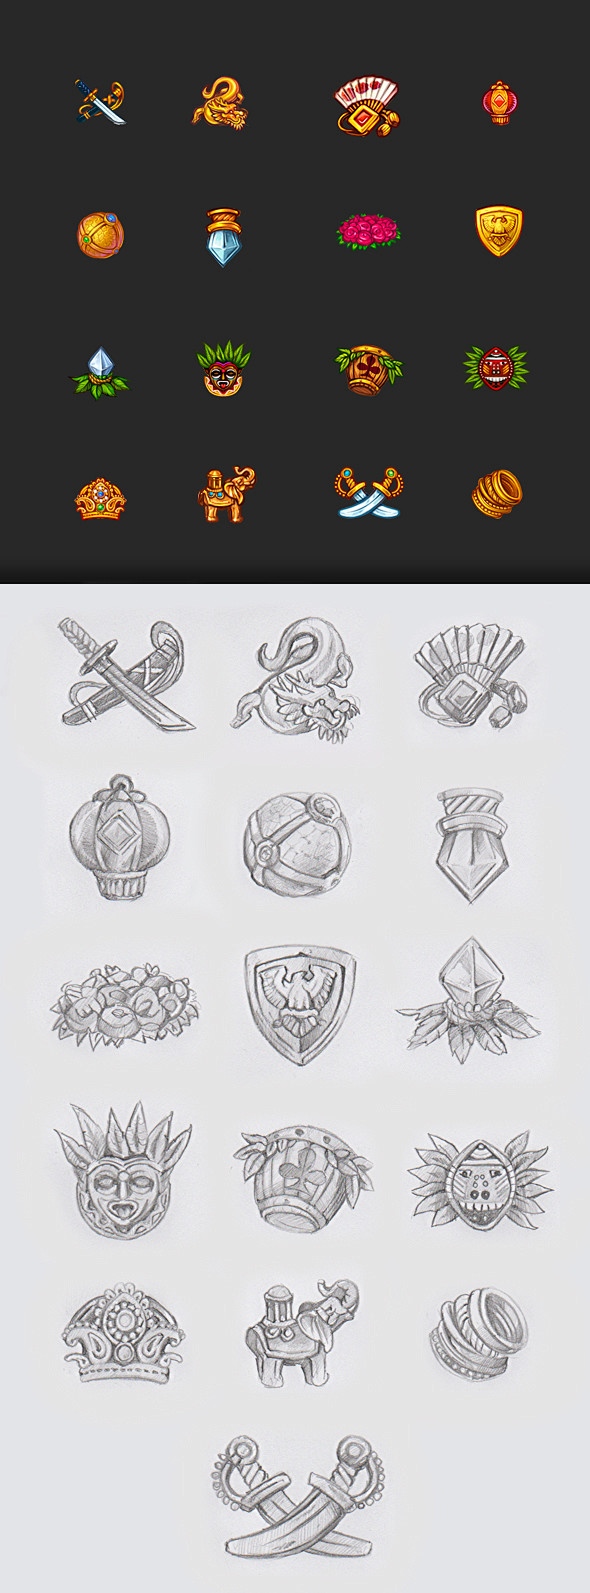 Icons for the game s...